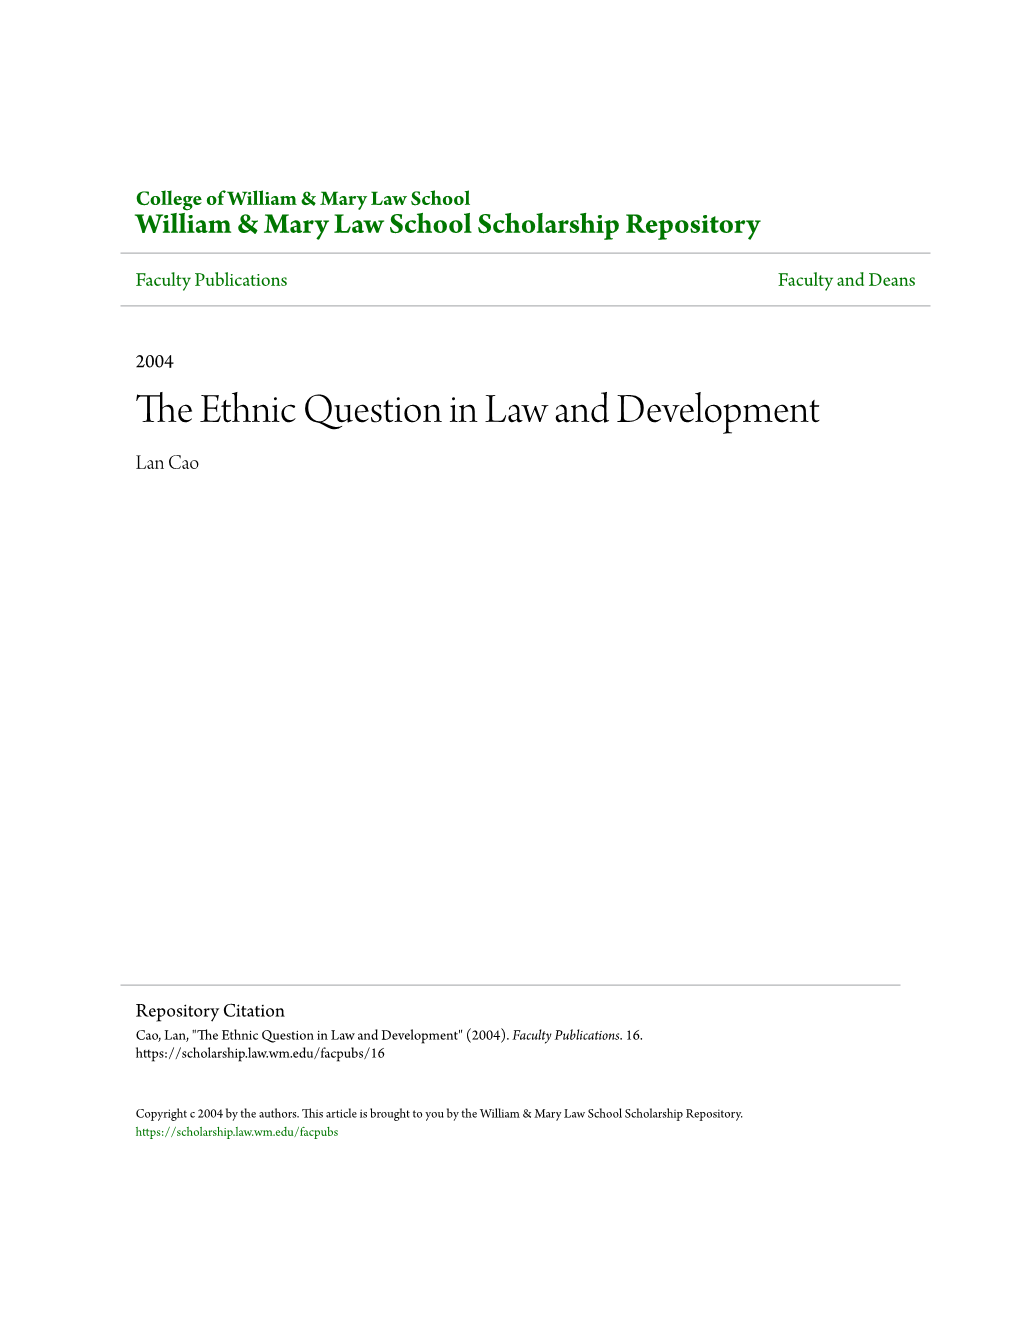 The Ethnic Question in Law and Development